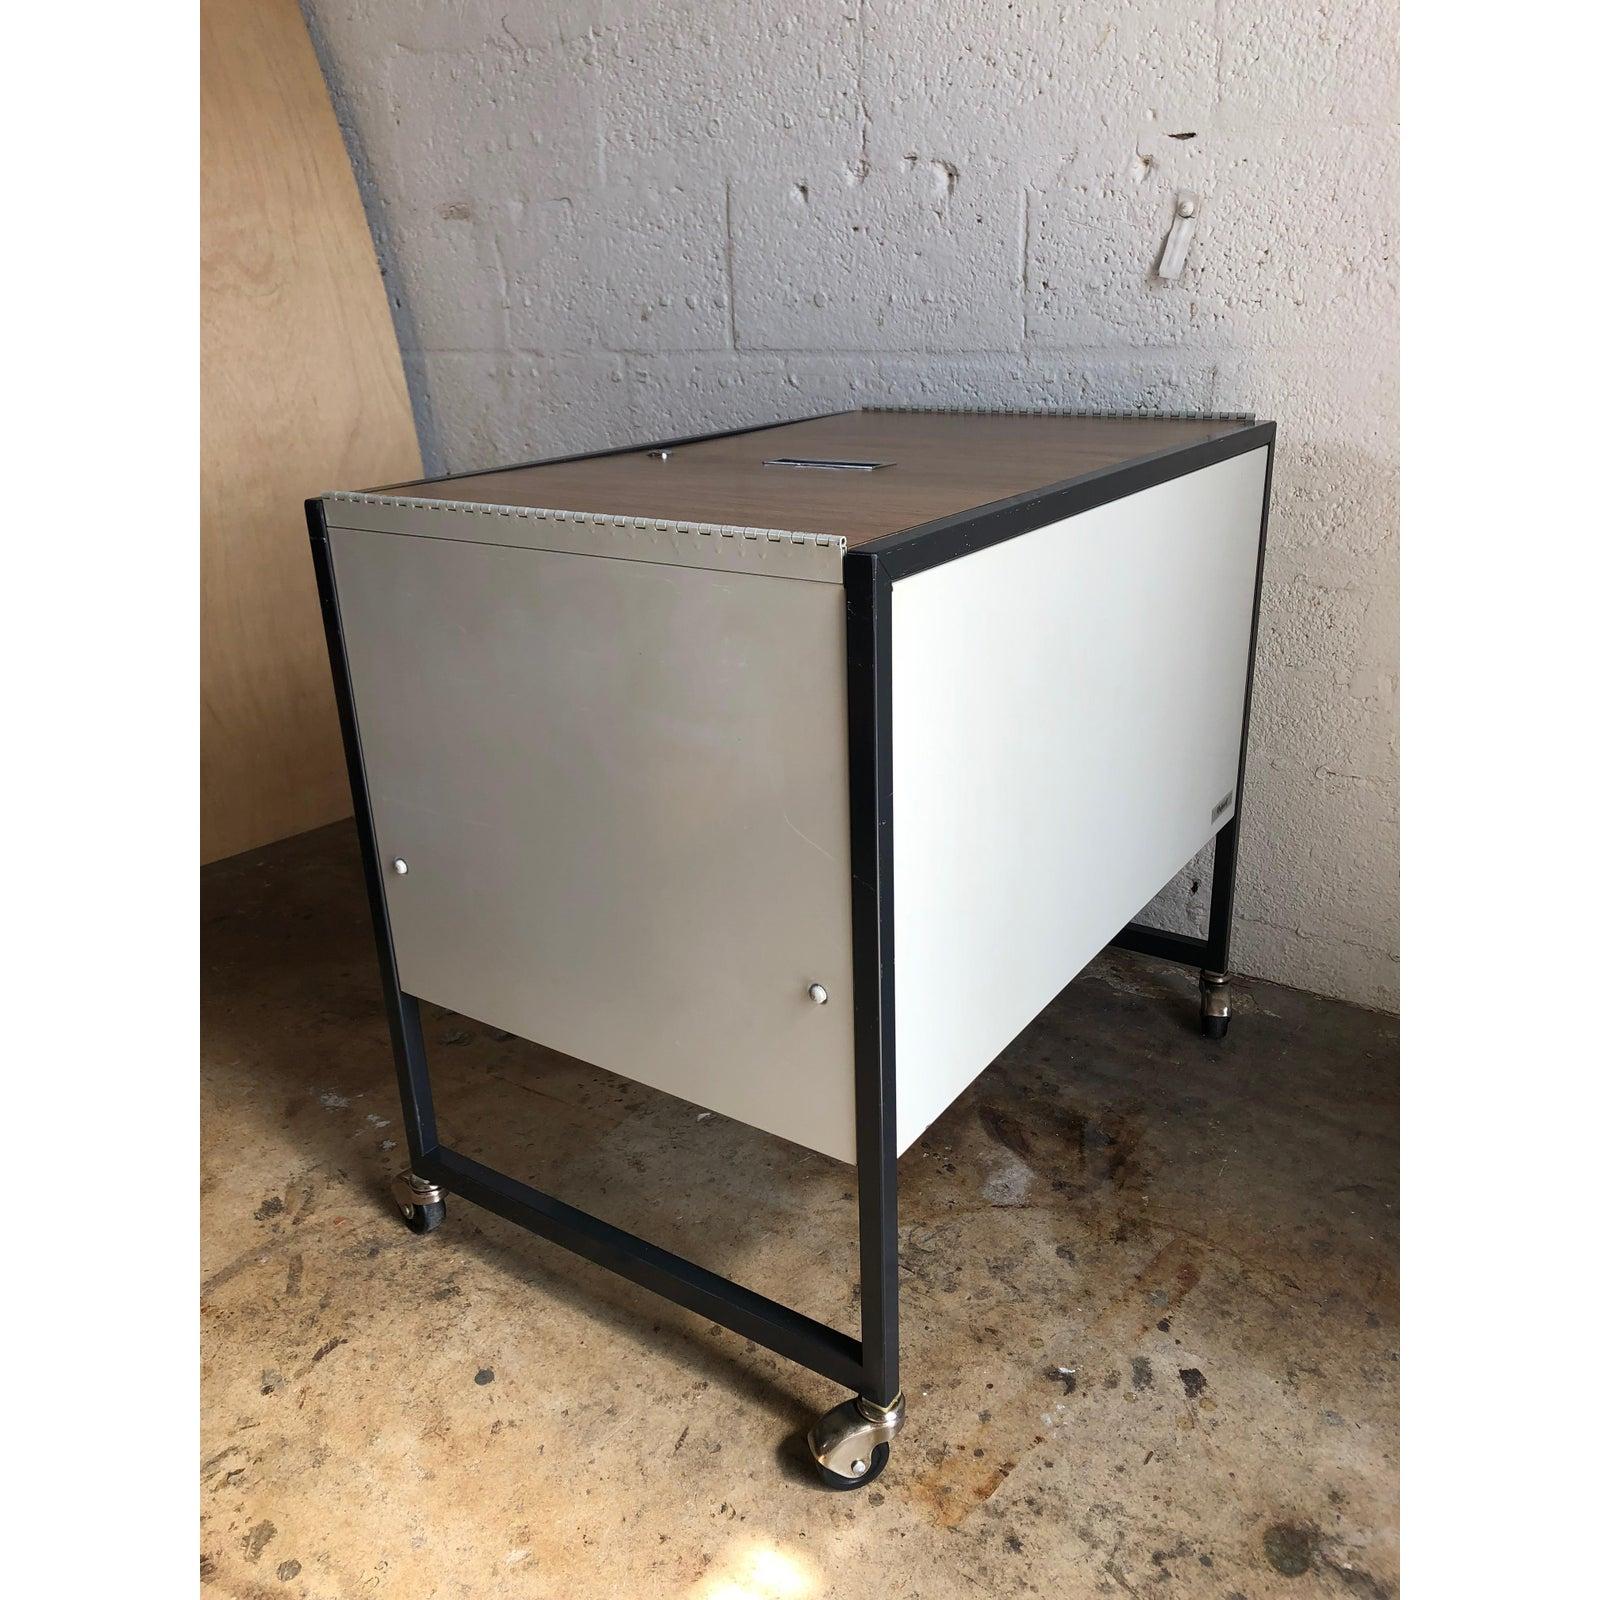 Steel Vintage Midcentury Industrial Filing Cabinet/ Cart by Oxford from the 1970s